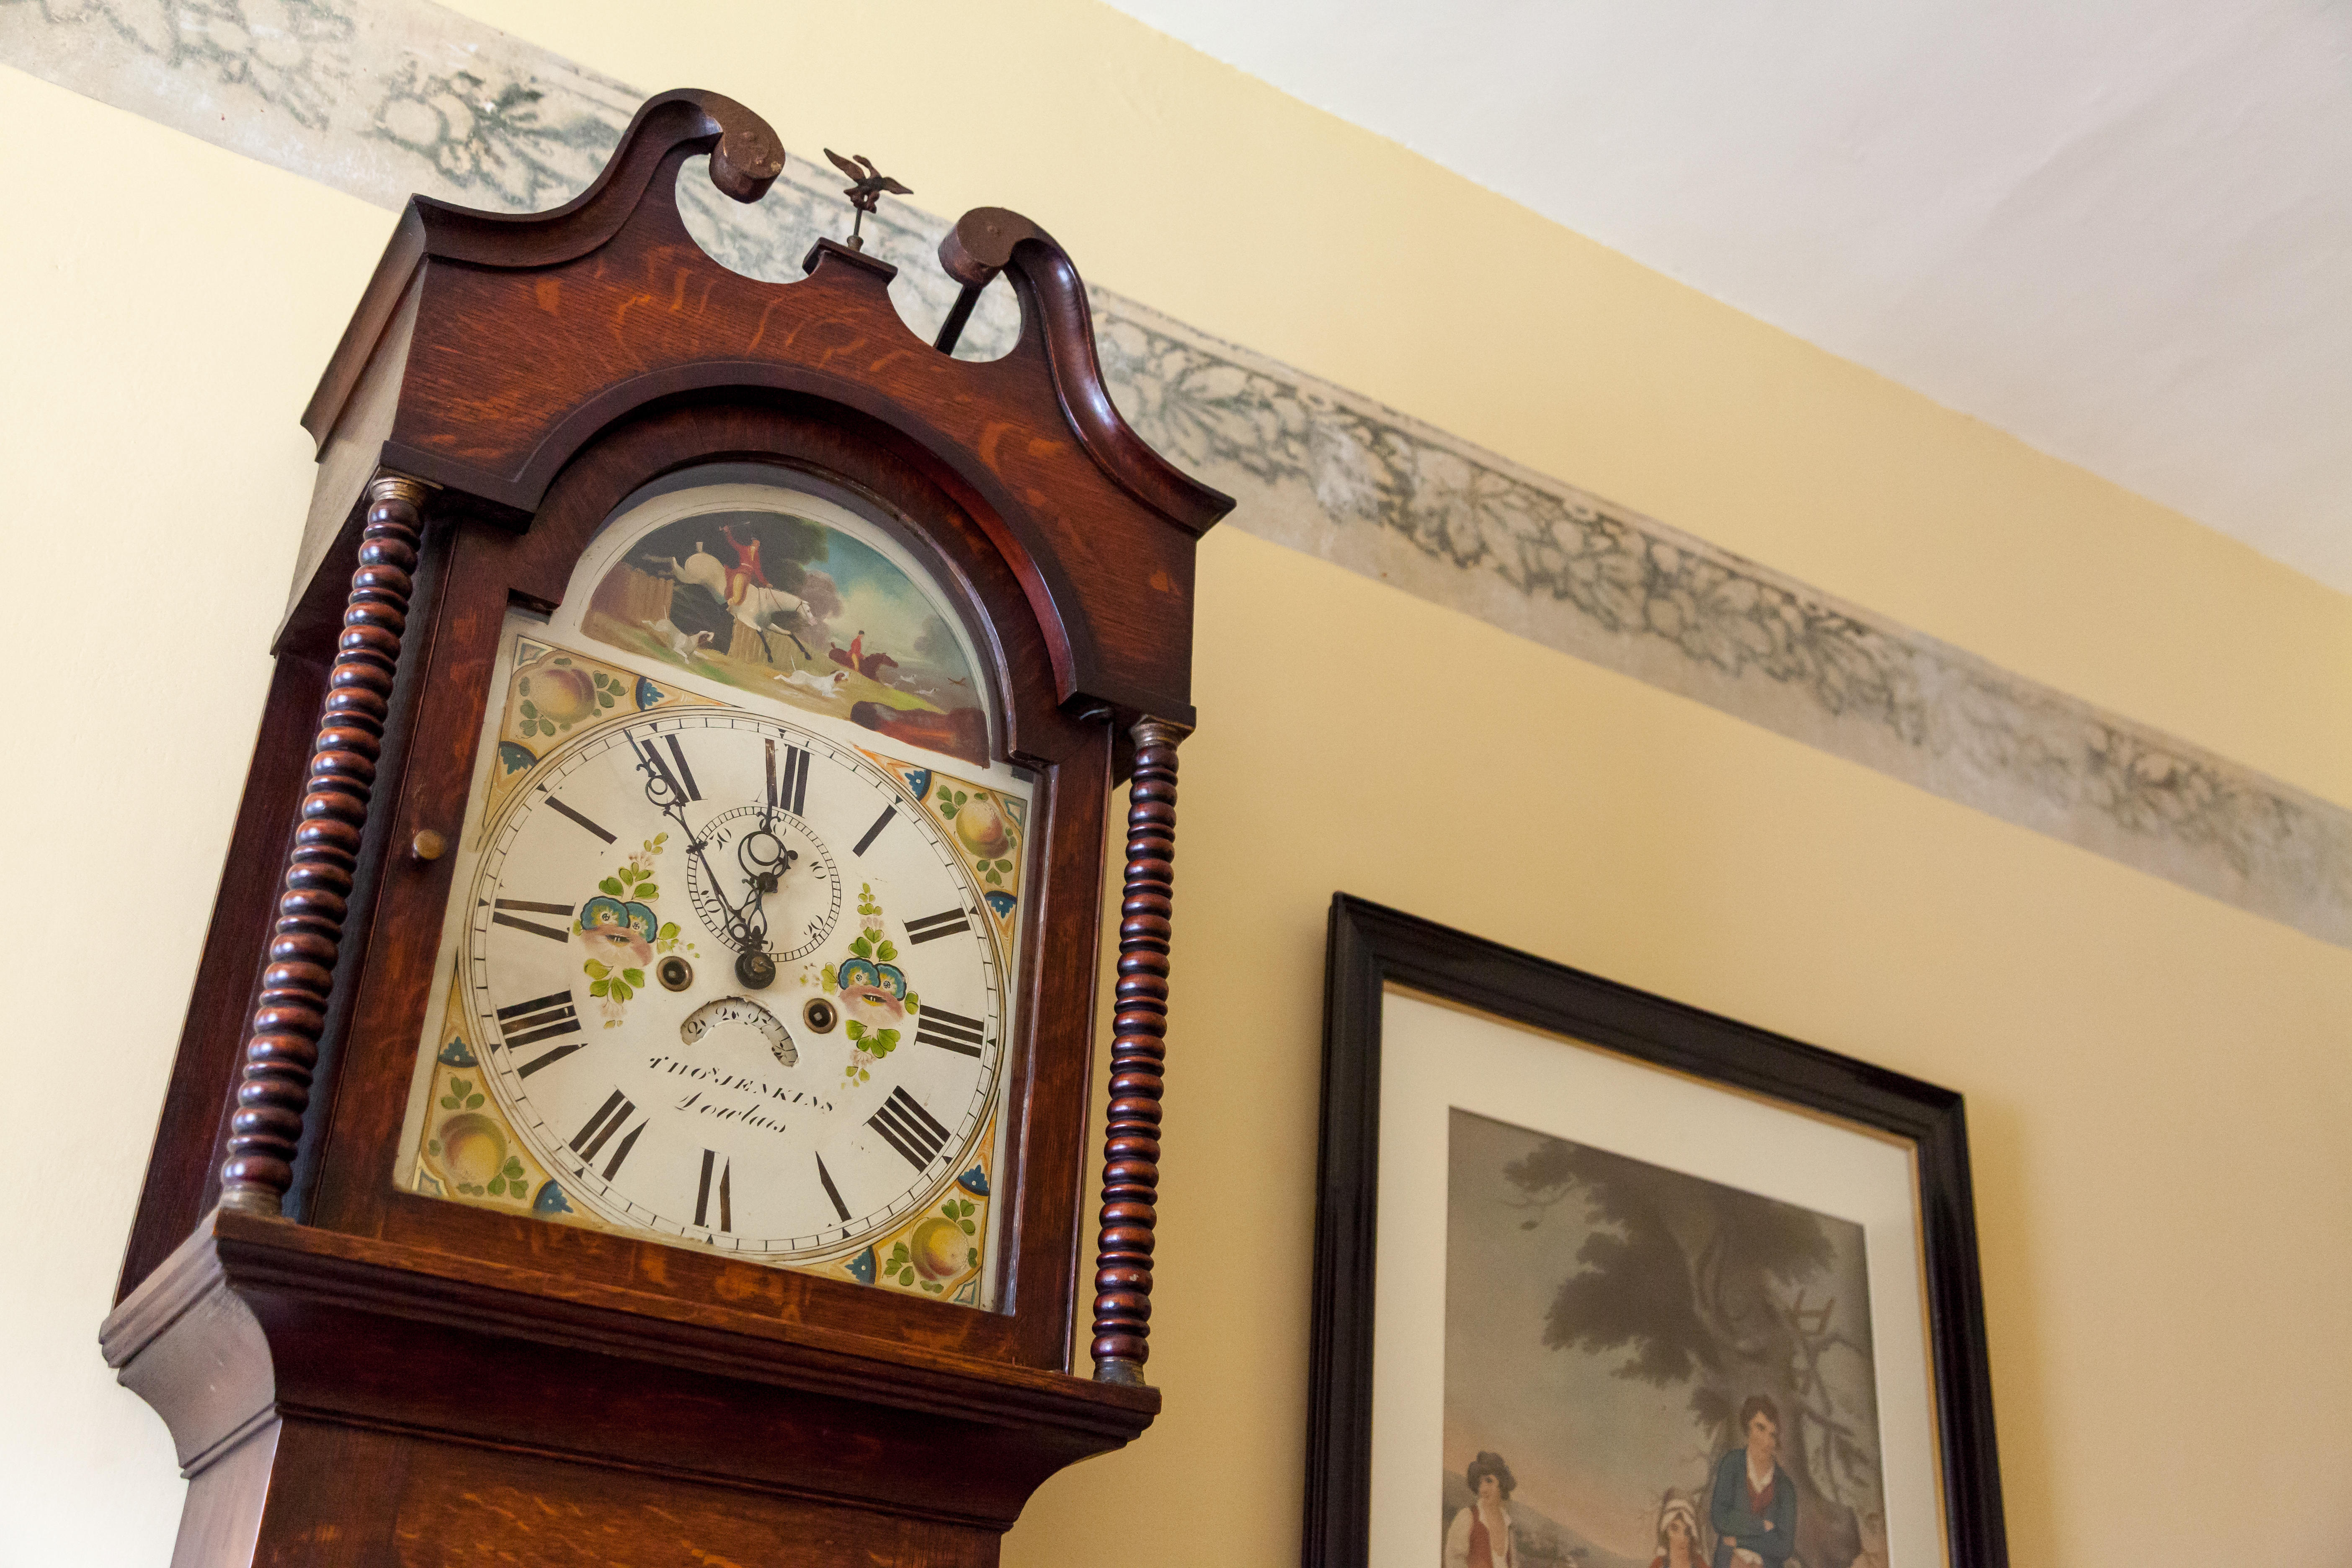 Keeping time with the old grandfather clock